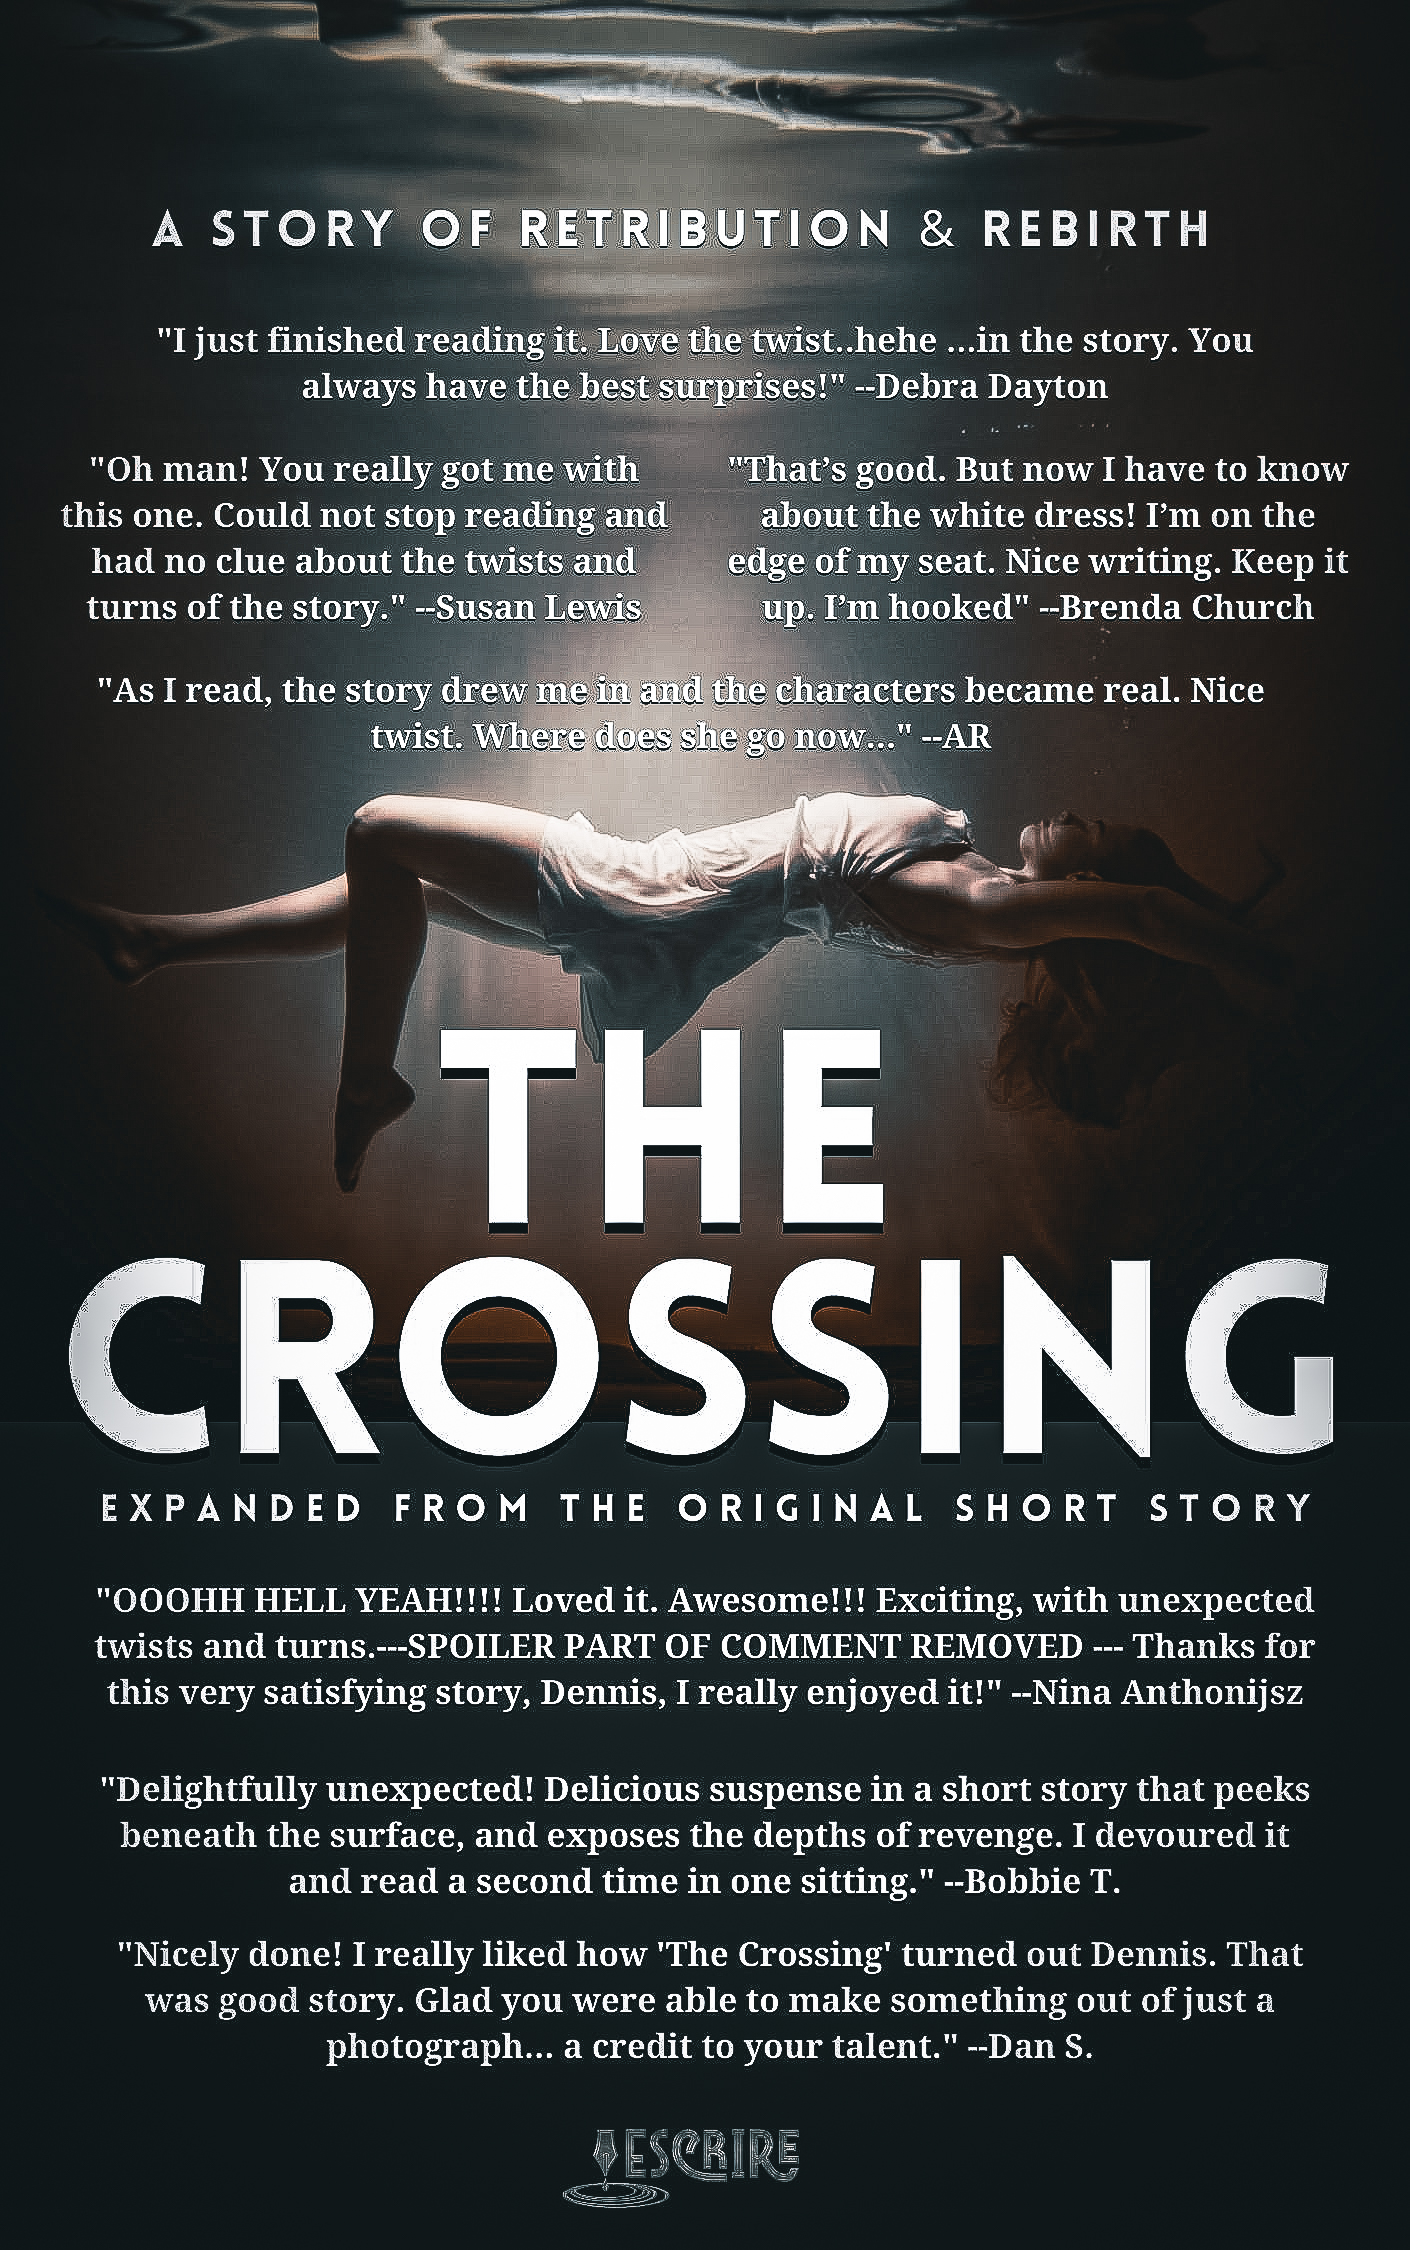 THE CROSSING (A Story of Retribution and Rebirth) A Novelette. 